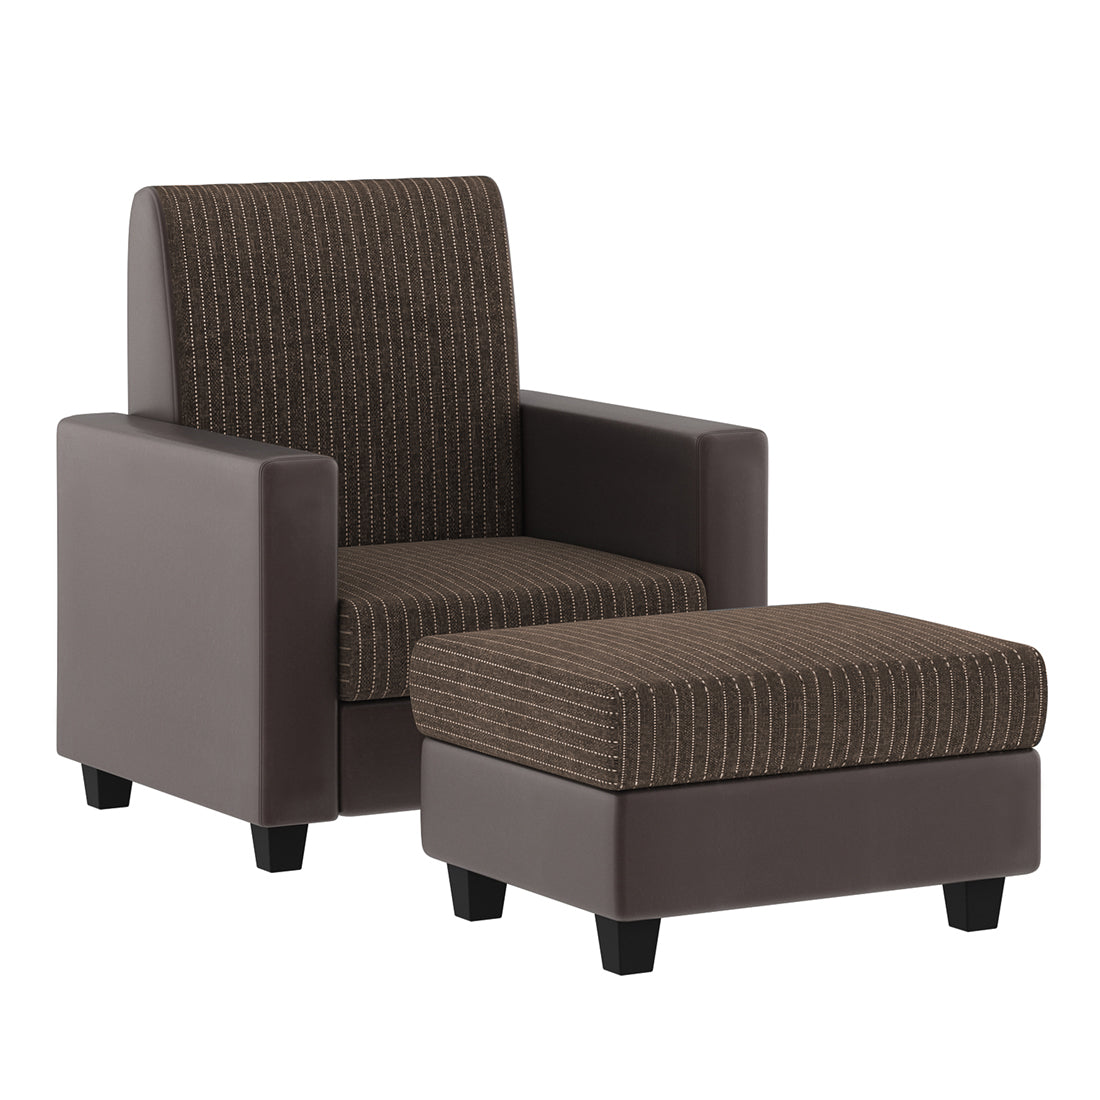 Baley Fabric 1 Seater Ottoman Chair In Lama Brown Colour